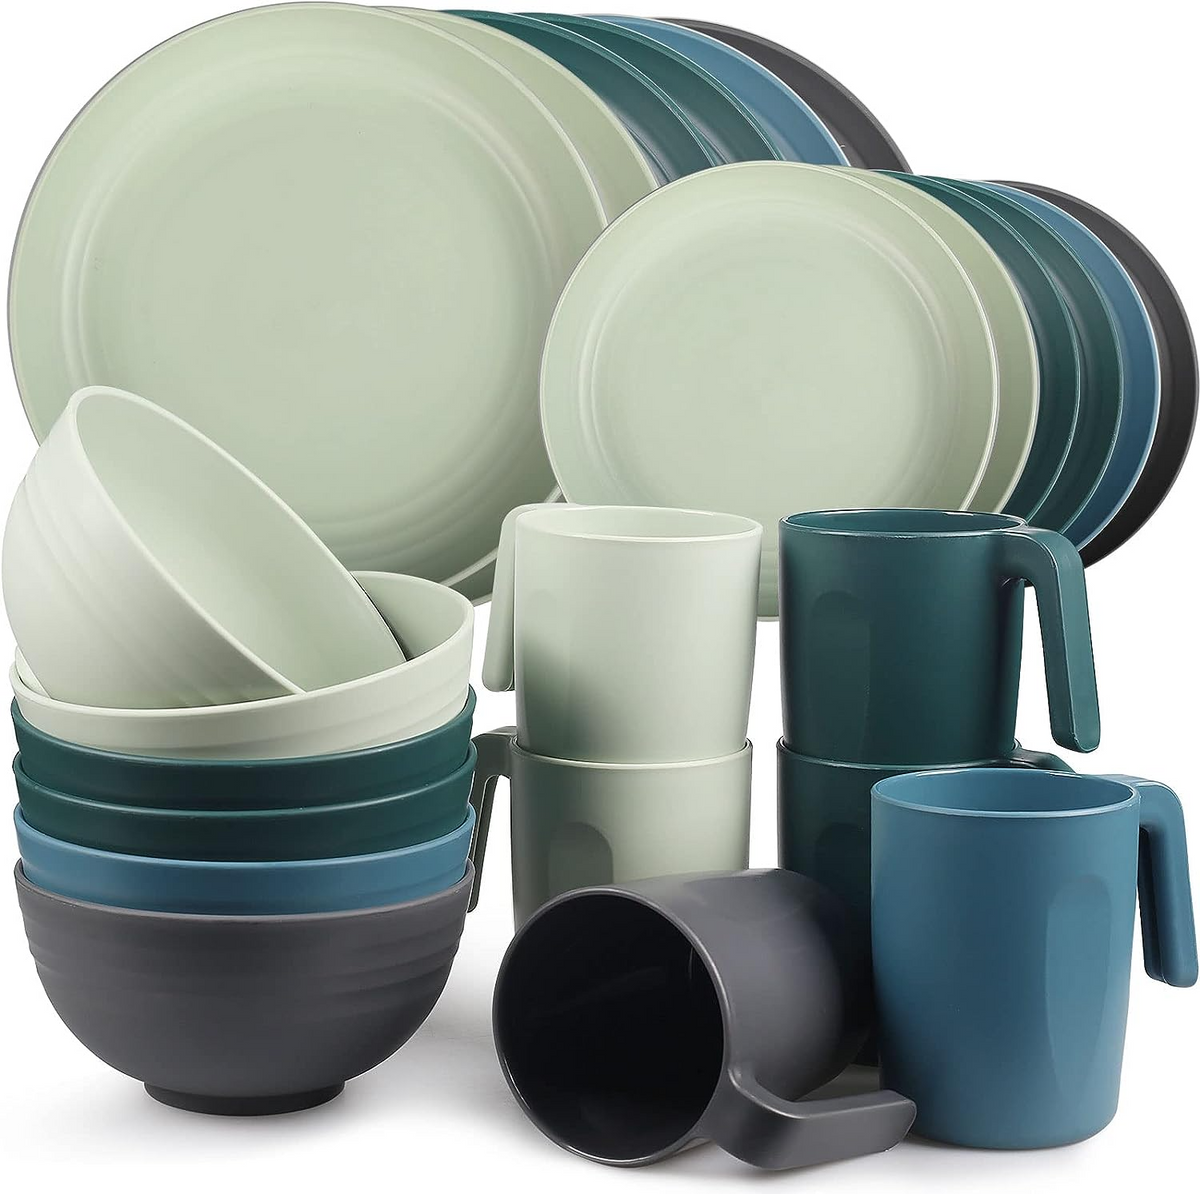 Greentainer Plastic Camping Crockery Sets